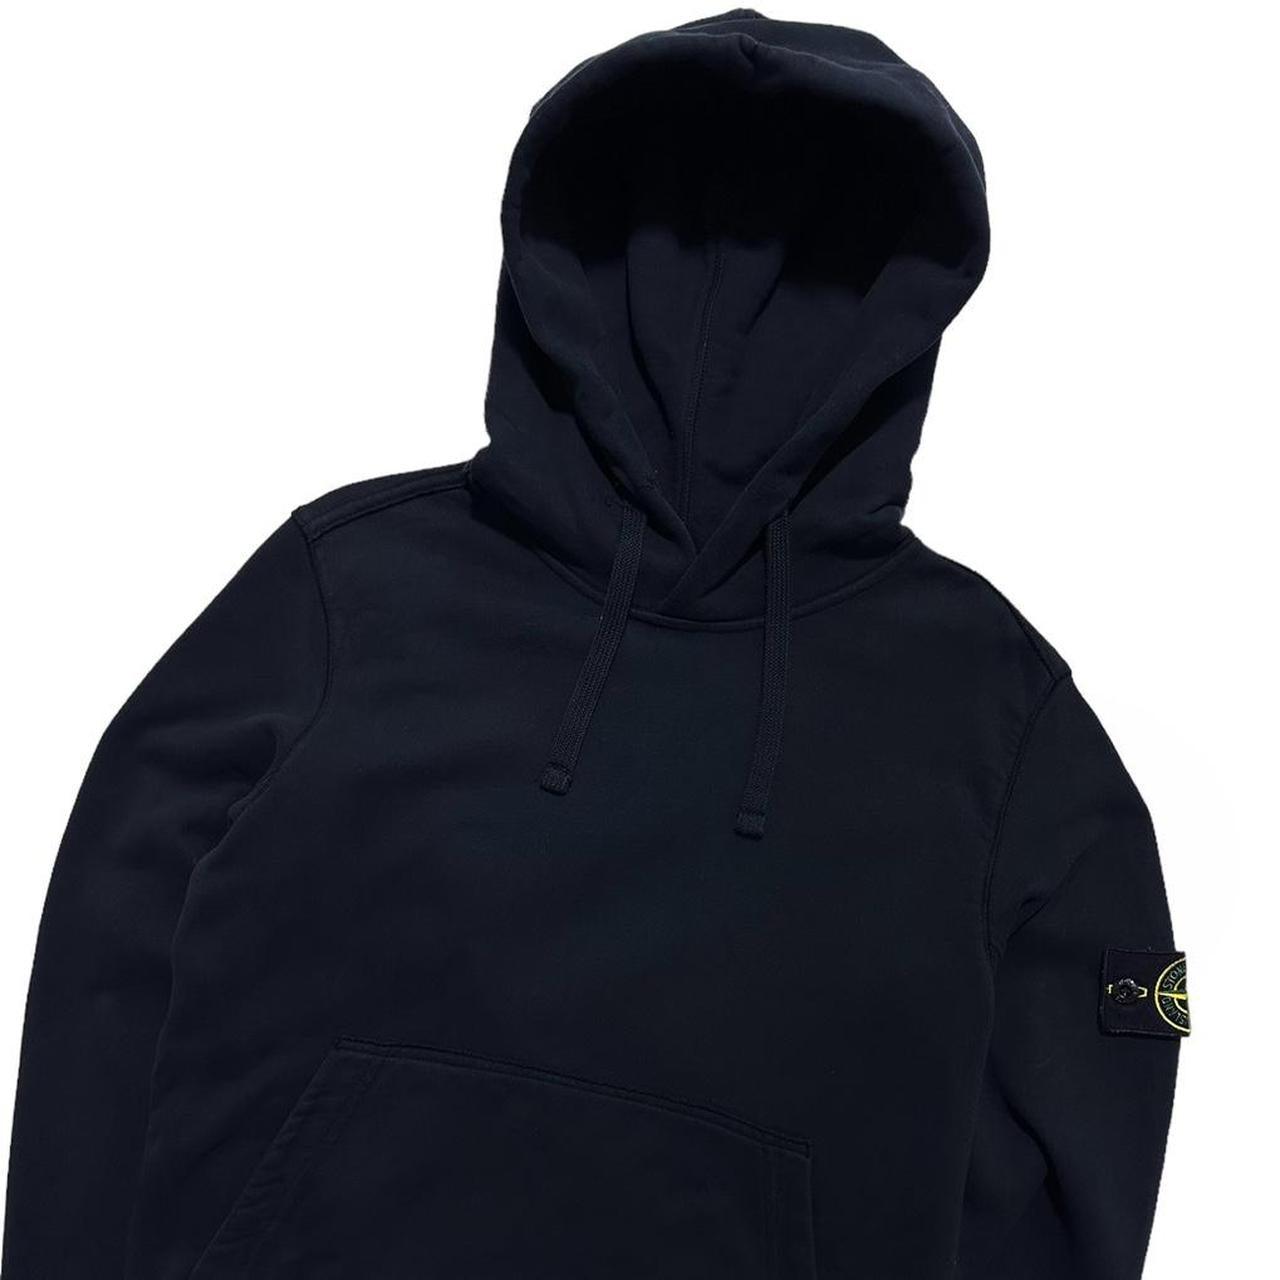 Stone Island Navy Pullover Hoodie - Known Source